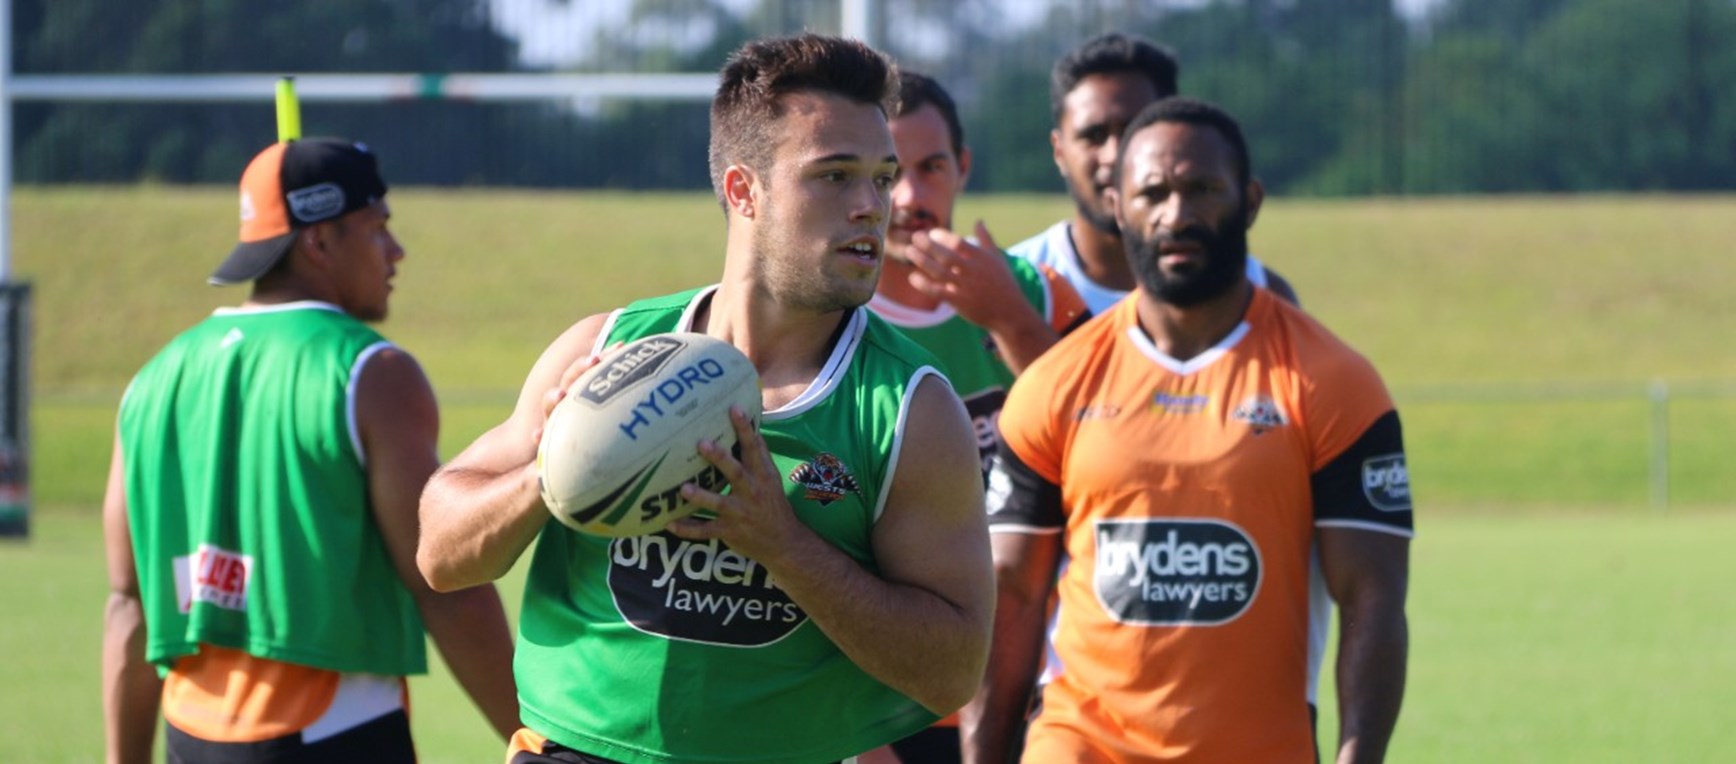 Gallery: Final Day of Pre-Season Camp